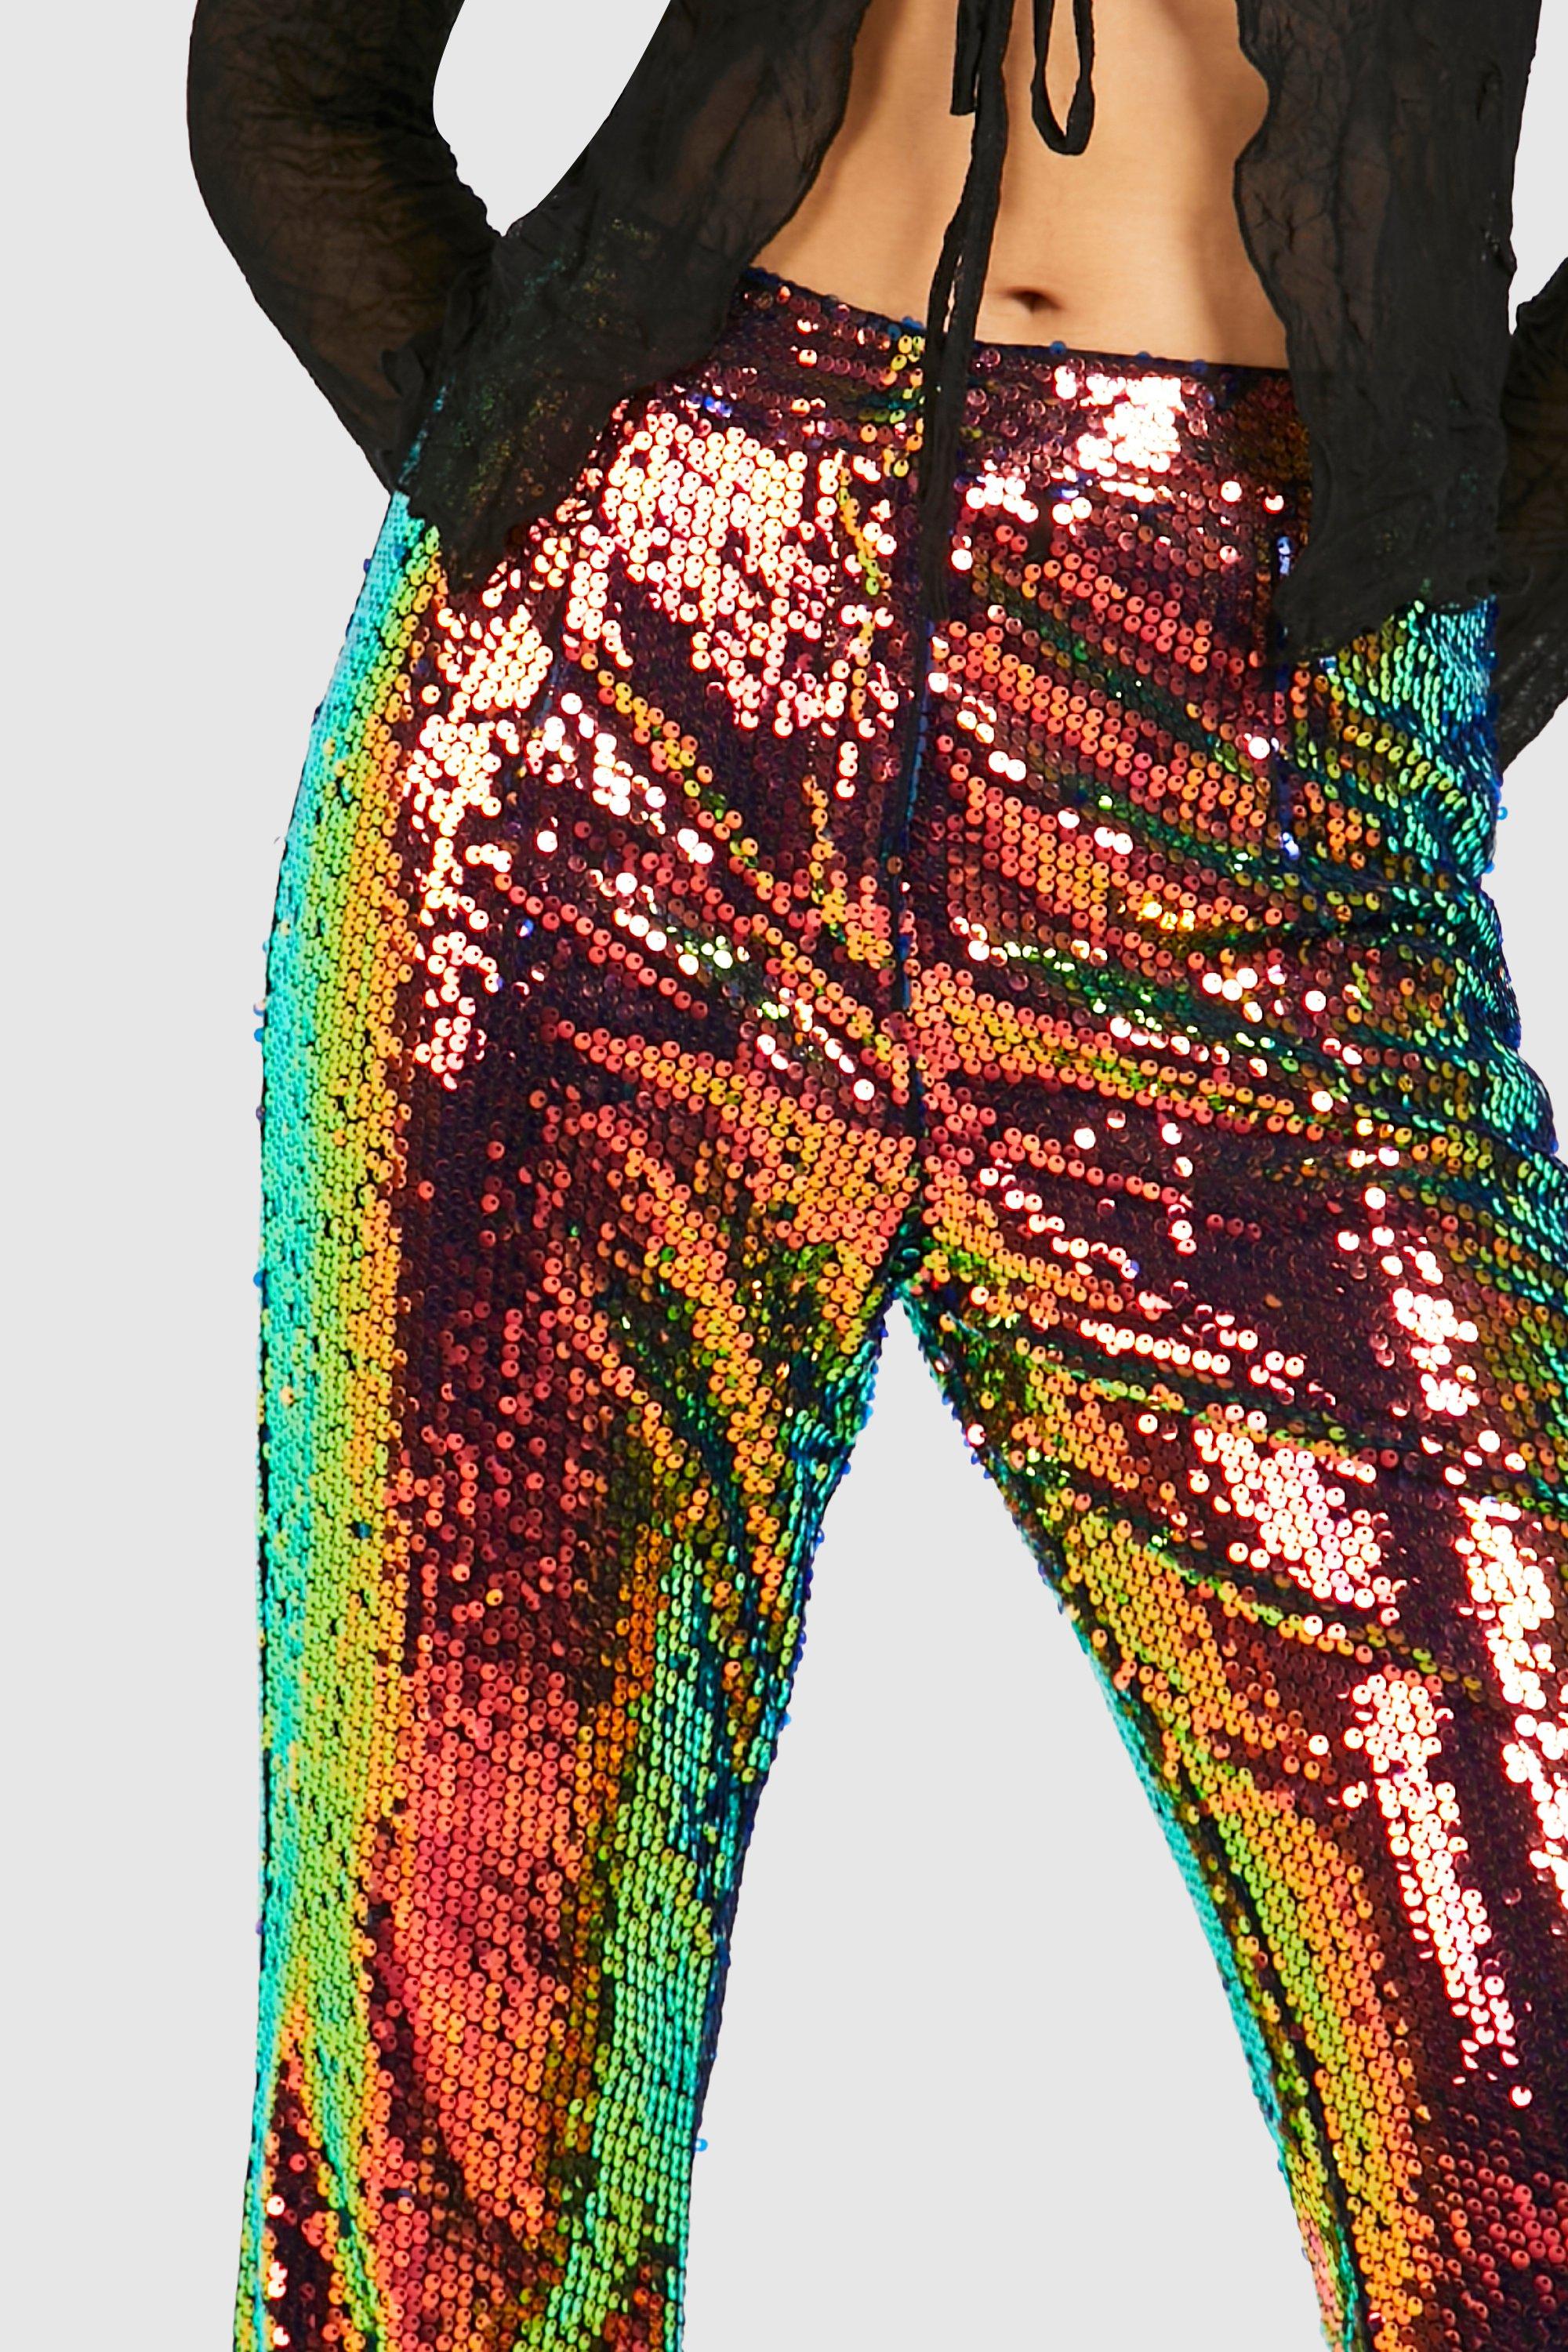 SEQUIN FLARE PANTS  Sequin flare pants, Sequins pants outfit